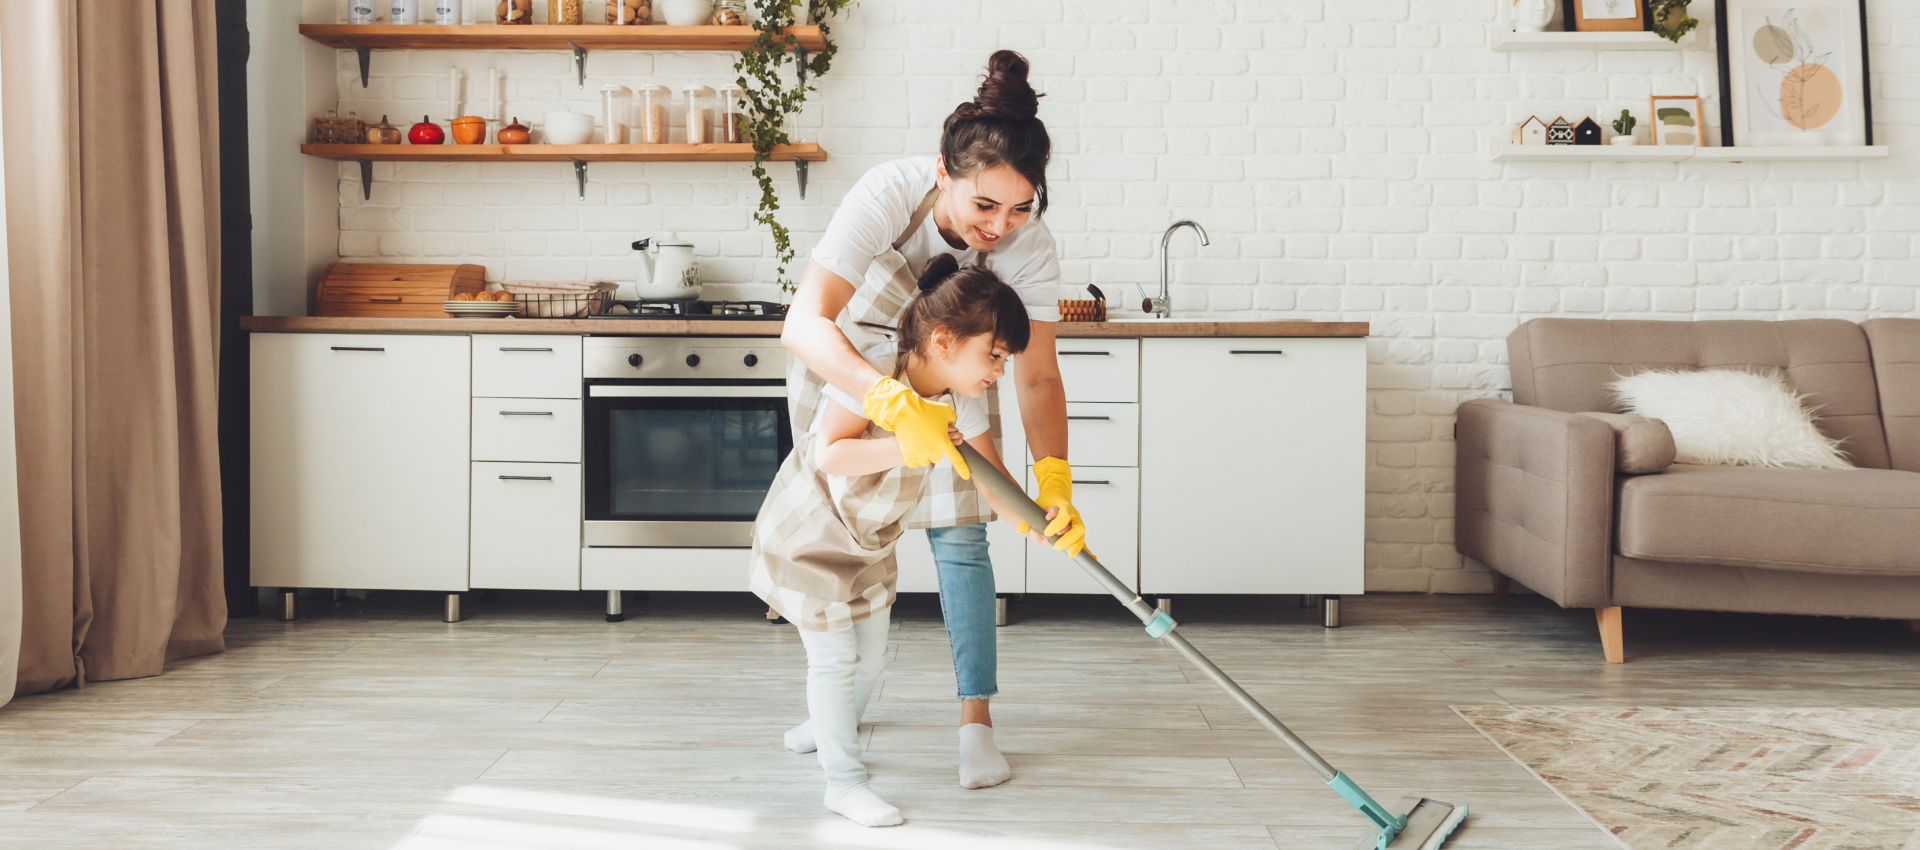 Adult and Child Mopping Floor